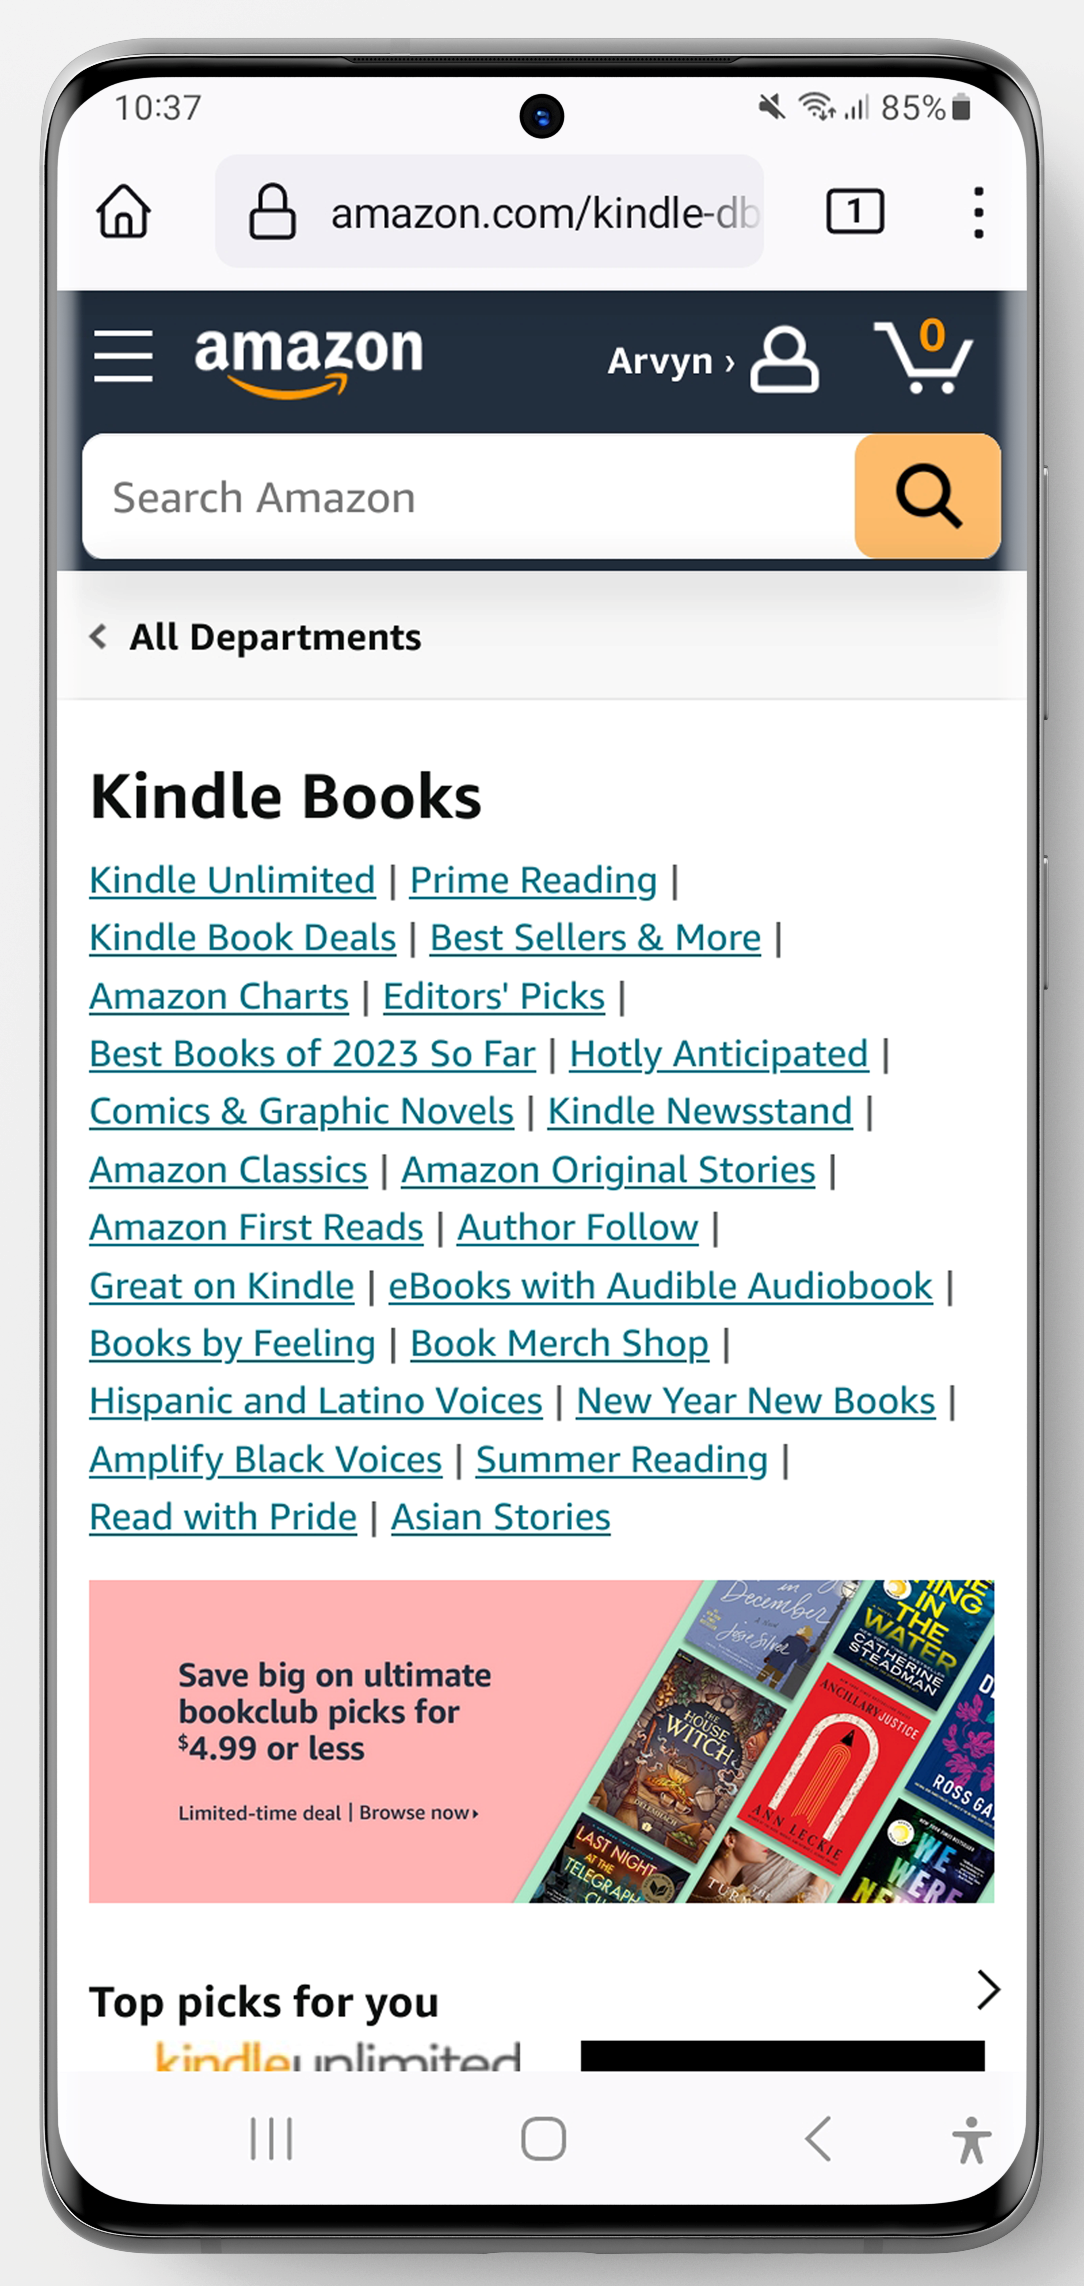 Amazon Kindle Store Home Page on Android